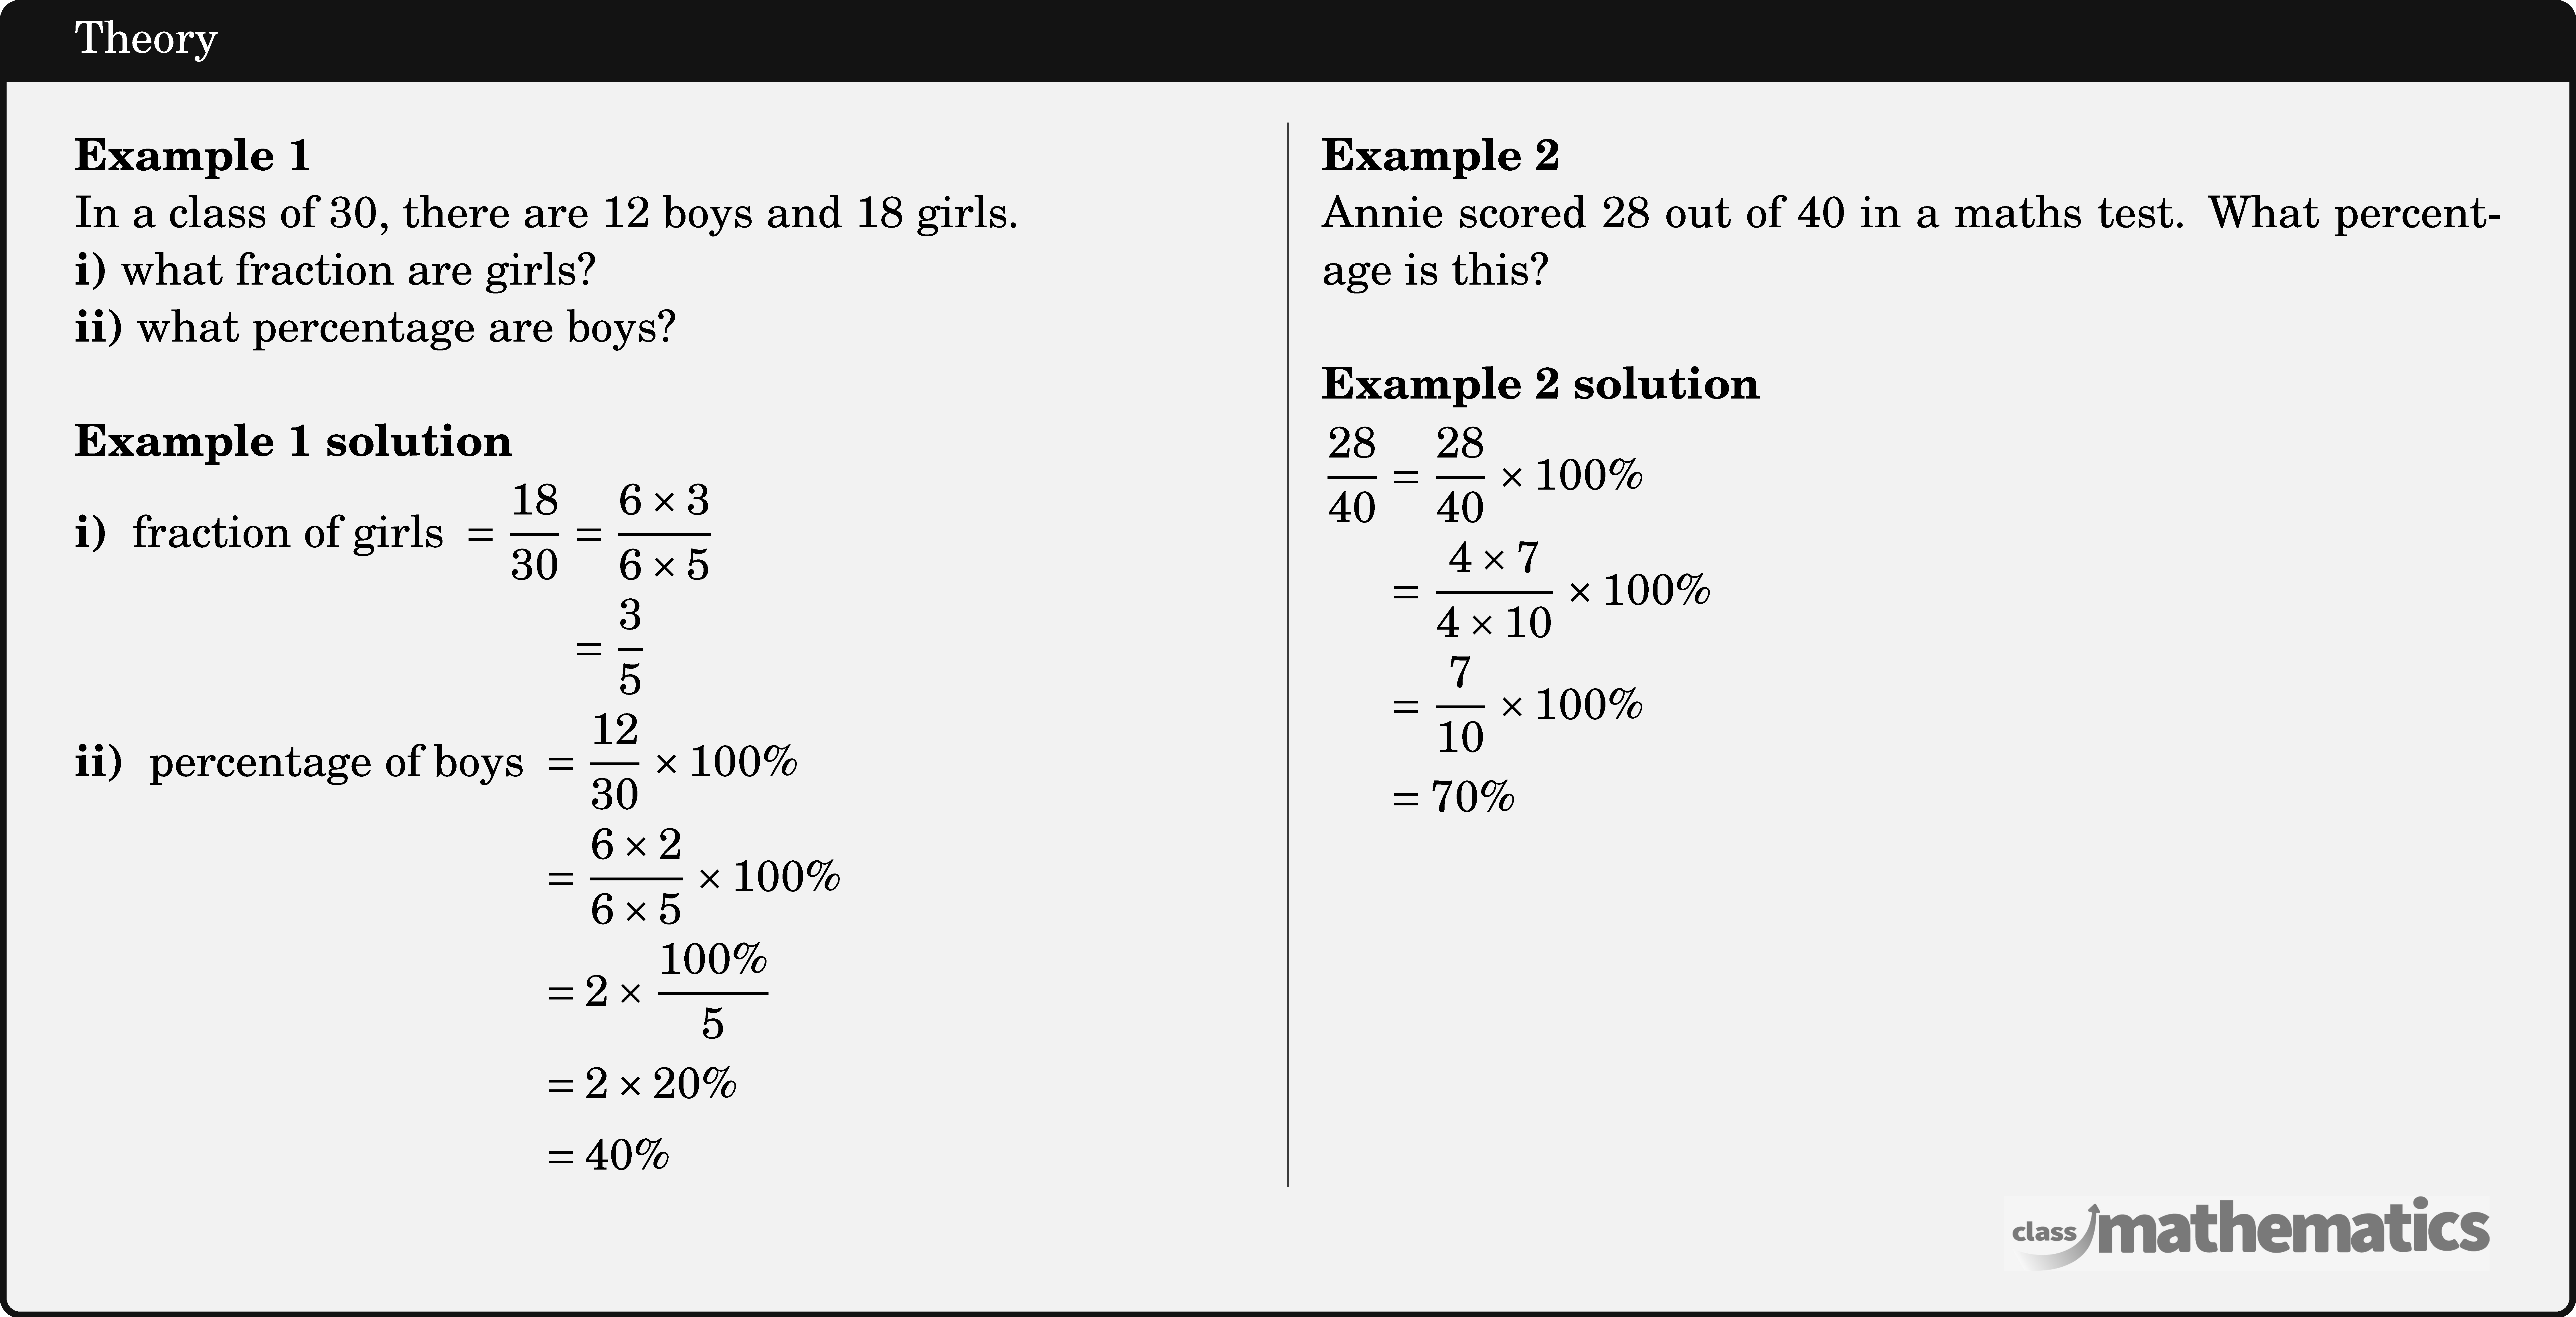 \begin{multicols}{2}  \textbf{Example 1}\\ In a class of 30, there are 12 boys and 18 girls.\\ \textbf{i)} what fraction are girls?\\ \textbf{ii)} what percentage are boys?\\  \textbf{Example 1 solution}\\[3pt] \textbf{i)} \(\begin{aligned}[t] \text { fraction of girls }=\frac{18}{30} & =\frac{6 \times 3}{6 \times 5} \\ & =\frac{3}{5} \end{aligned}\)\\[3pt] \textbf{ii)} \(\begin{aligned}[t] \text { percentage of boys } & =\frac{12}{30} \times 100 \% \\ & =\frac{6 \times 2}{6 \times 5} \times 100 \% \\ & =2 \times \frac{100 \%}{5} \\ & =2 \times 20 \% \\ & =40 \% \end{aligned}\)  \columnbreak \textbf{Example 2}\\ Annie scored 28 out of 40 in a maths test. What percentage is this?\\  \textbf{Example 2 solution}\\[3pt] \(\begin{aligned} \frac{28}{40} & =\frac{28}{40} \times 100 \% \\ & =\frac{4 \times 7}{4 \times 10} \times 100 \% \\ & =\frac{7}{10} \times 100 \% \\ & =70 \% \end{aligned}\) \end{multicols}